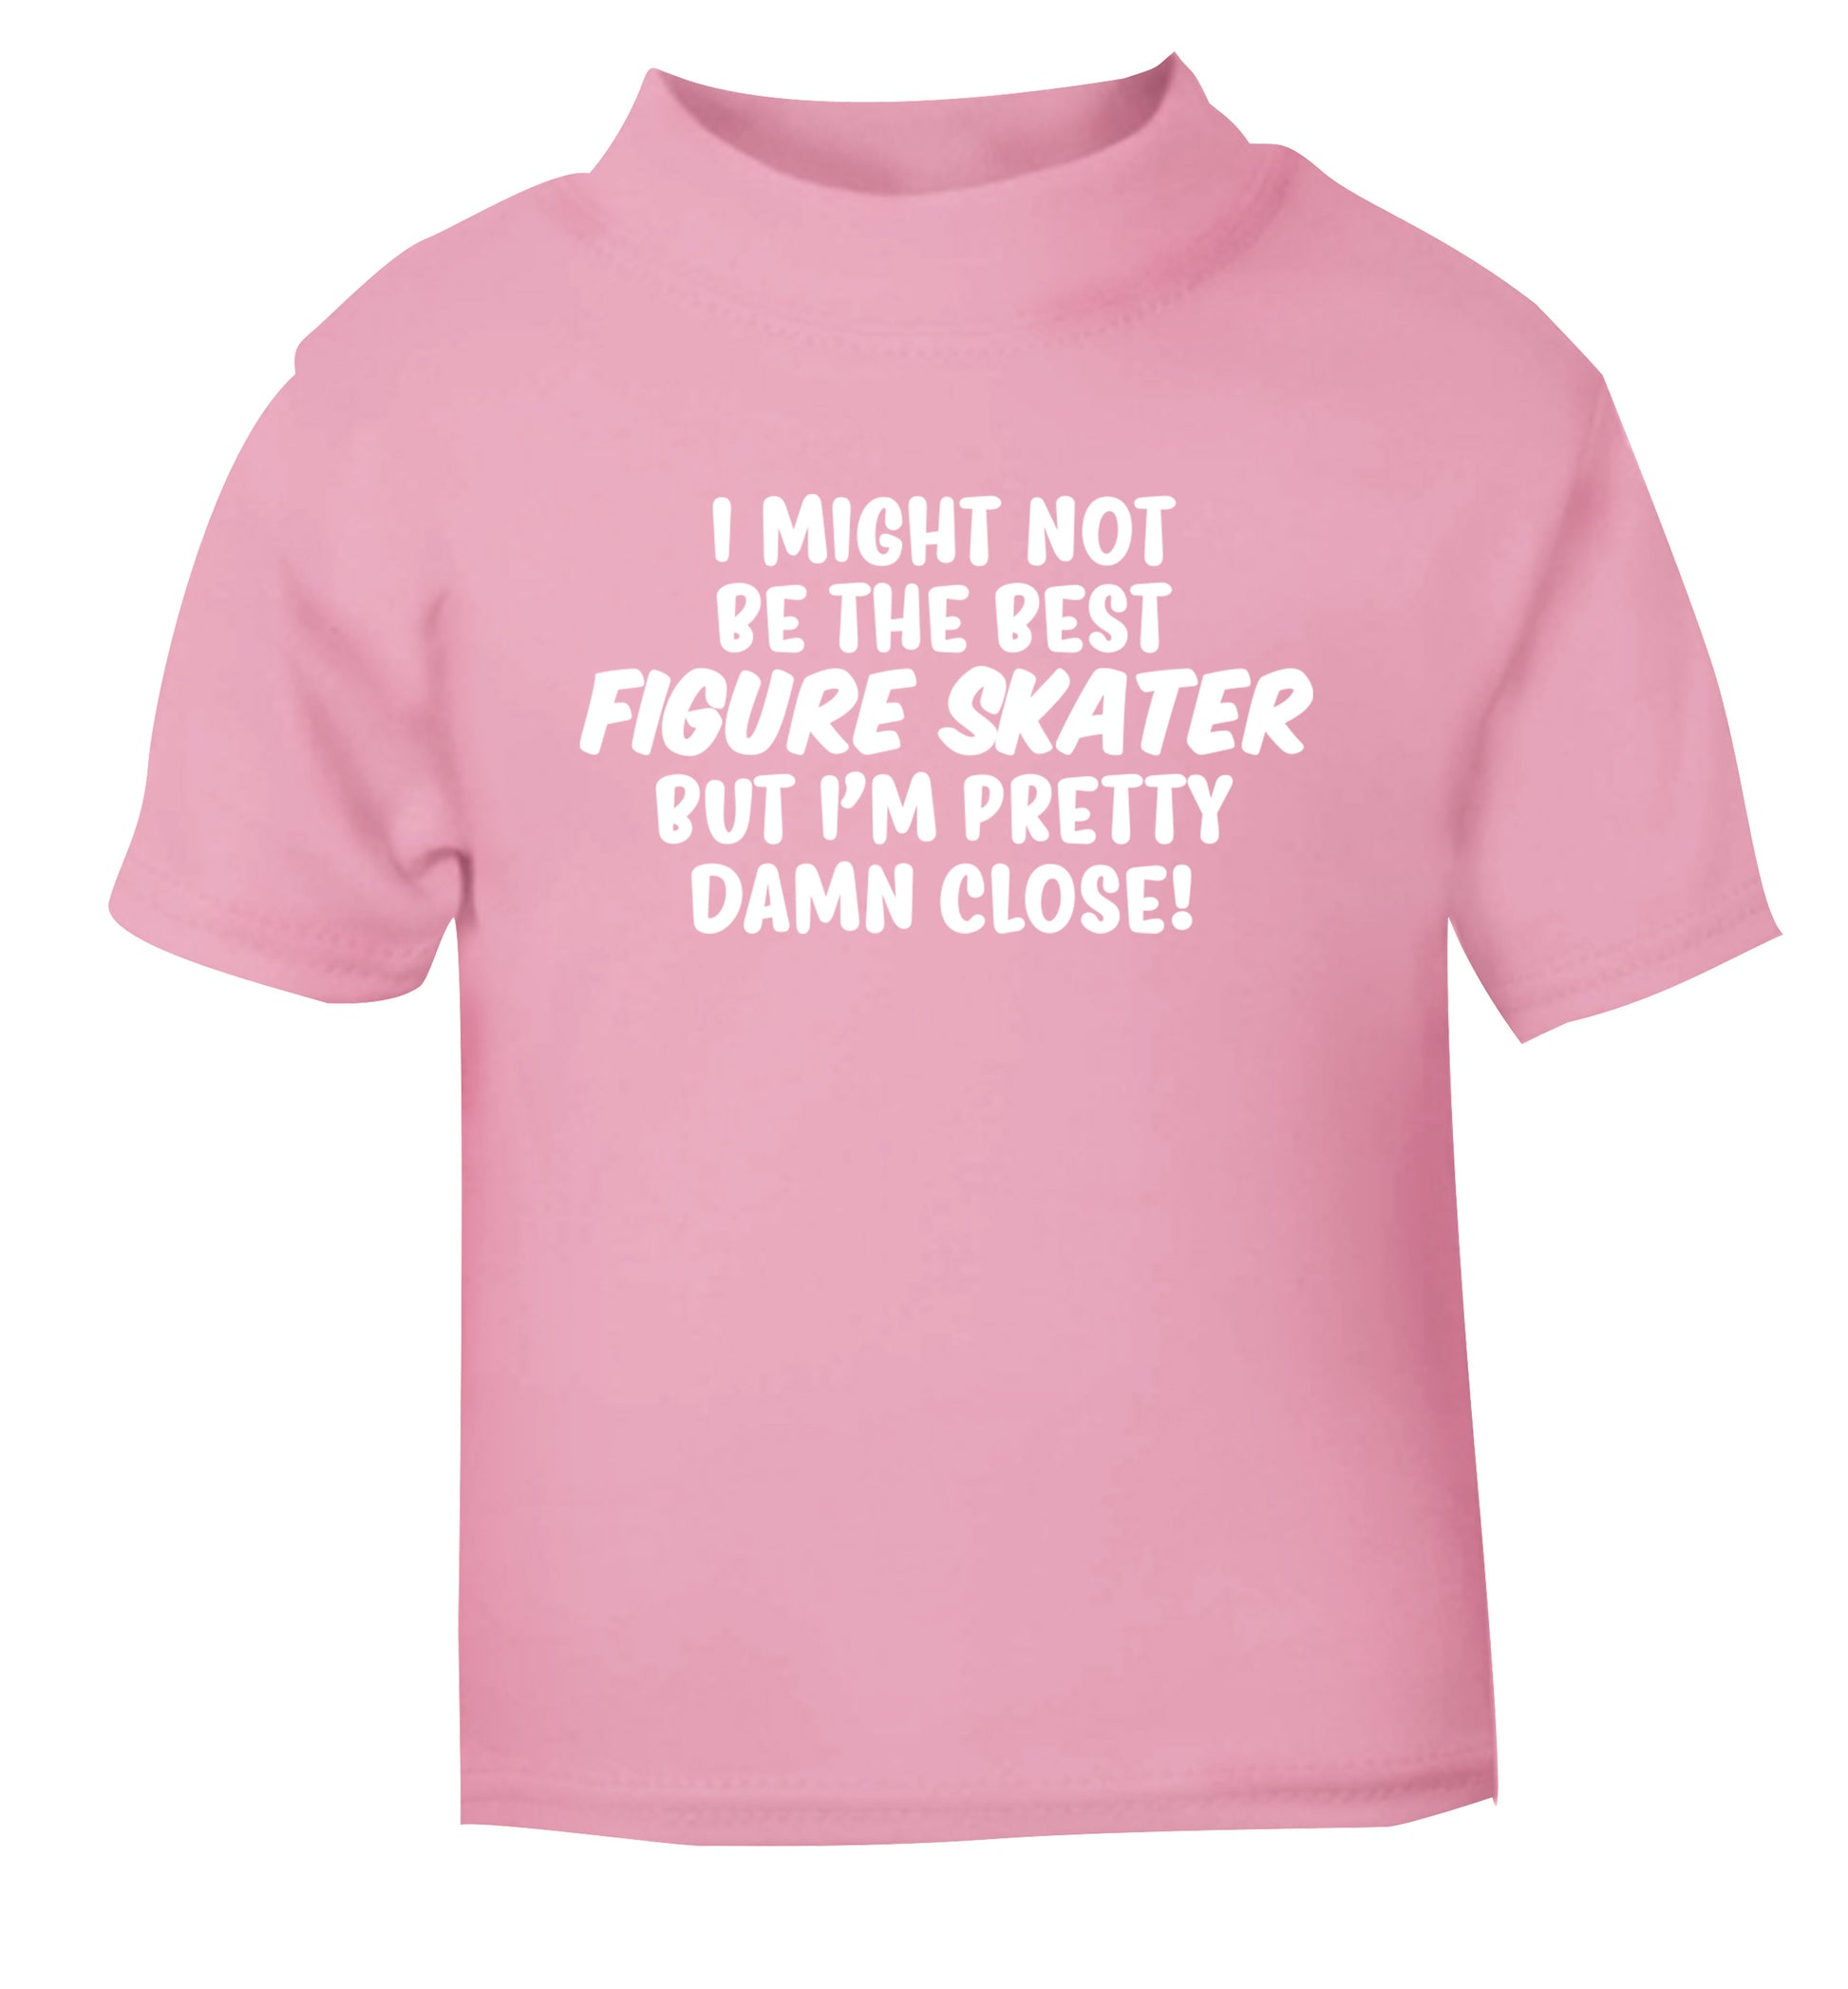 I might not be the best figure skater but I'm pretty damn close! light pink Baby Toddler Tshirt 2 Years